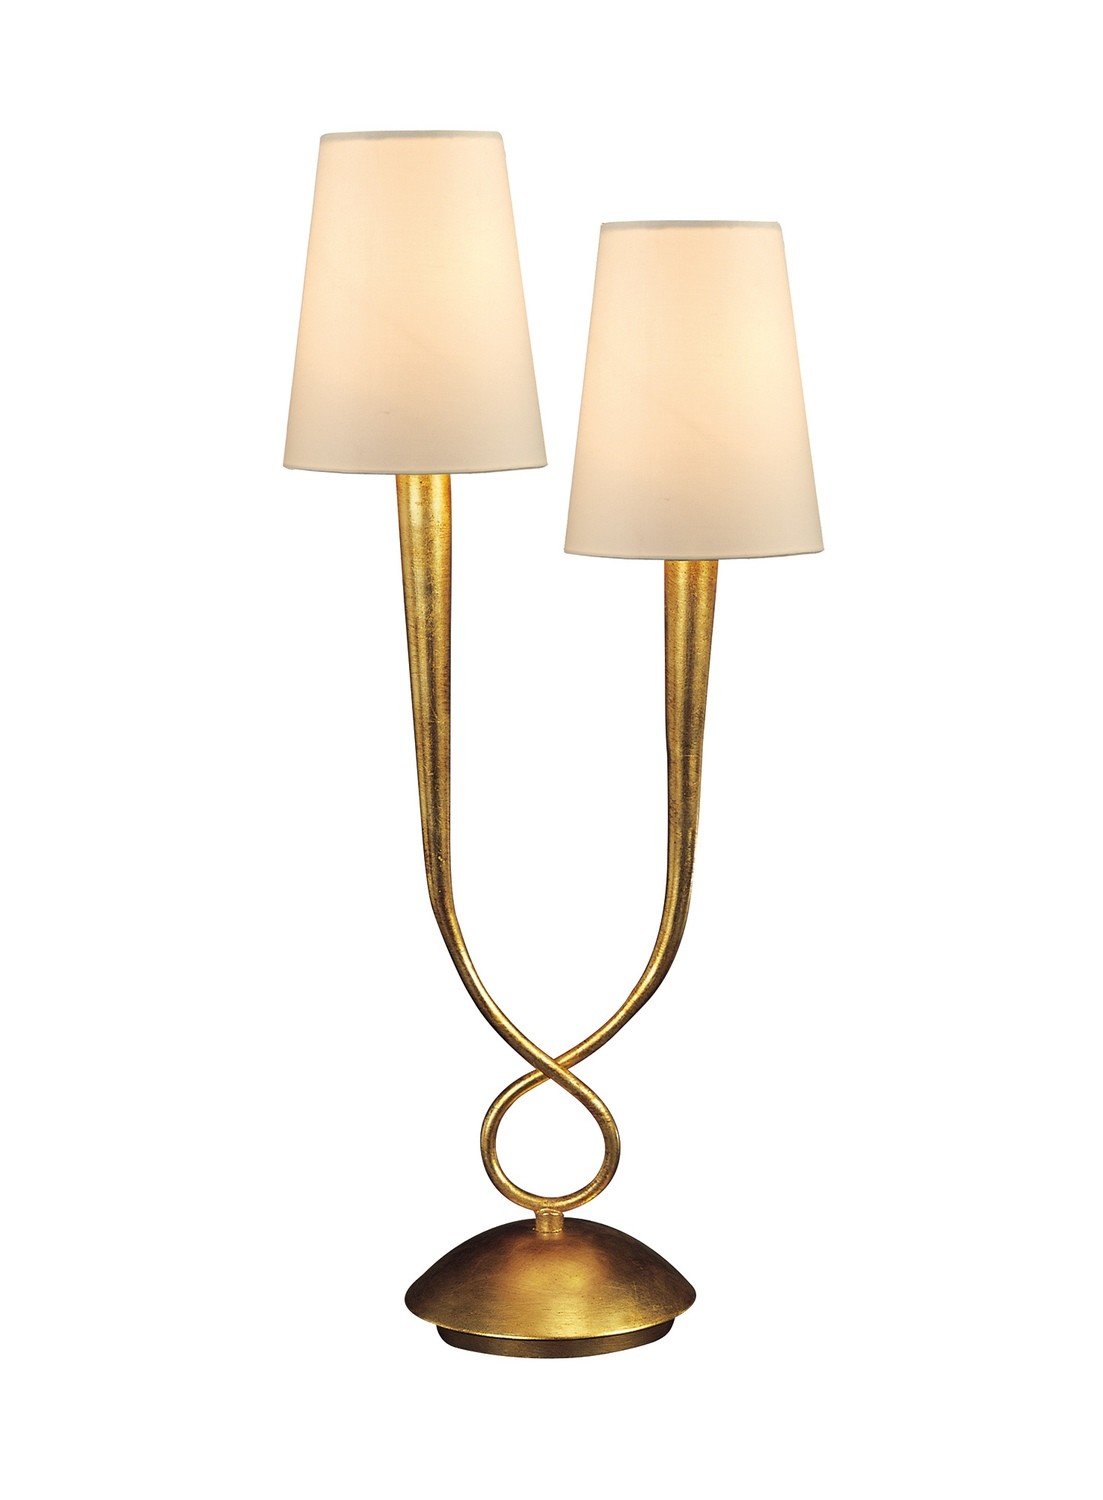 Paola Table Lamp 2 Light E14, Gold Painted With Cream Shades